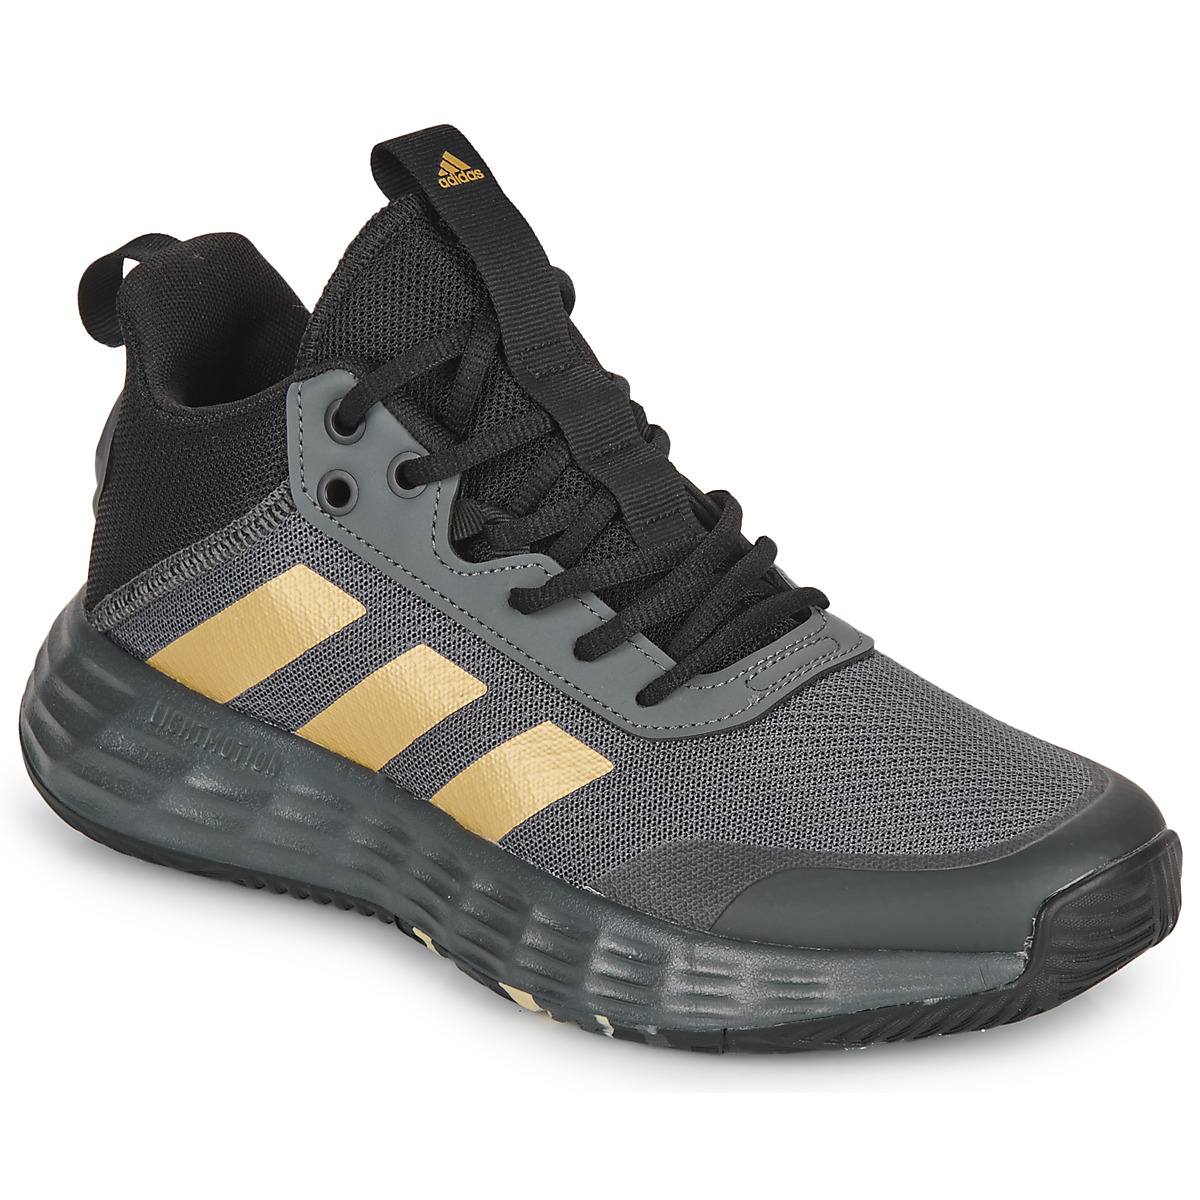 Shoes Europe € Fast OWNTHEGAME Spartoo / shoes - Grey 77,00 adidas - Gold delivery 2.0 Basketball Performance ! |